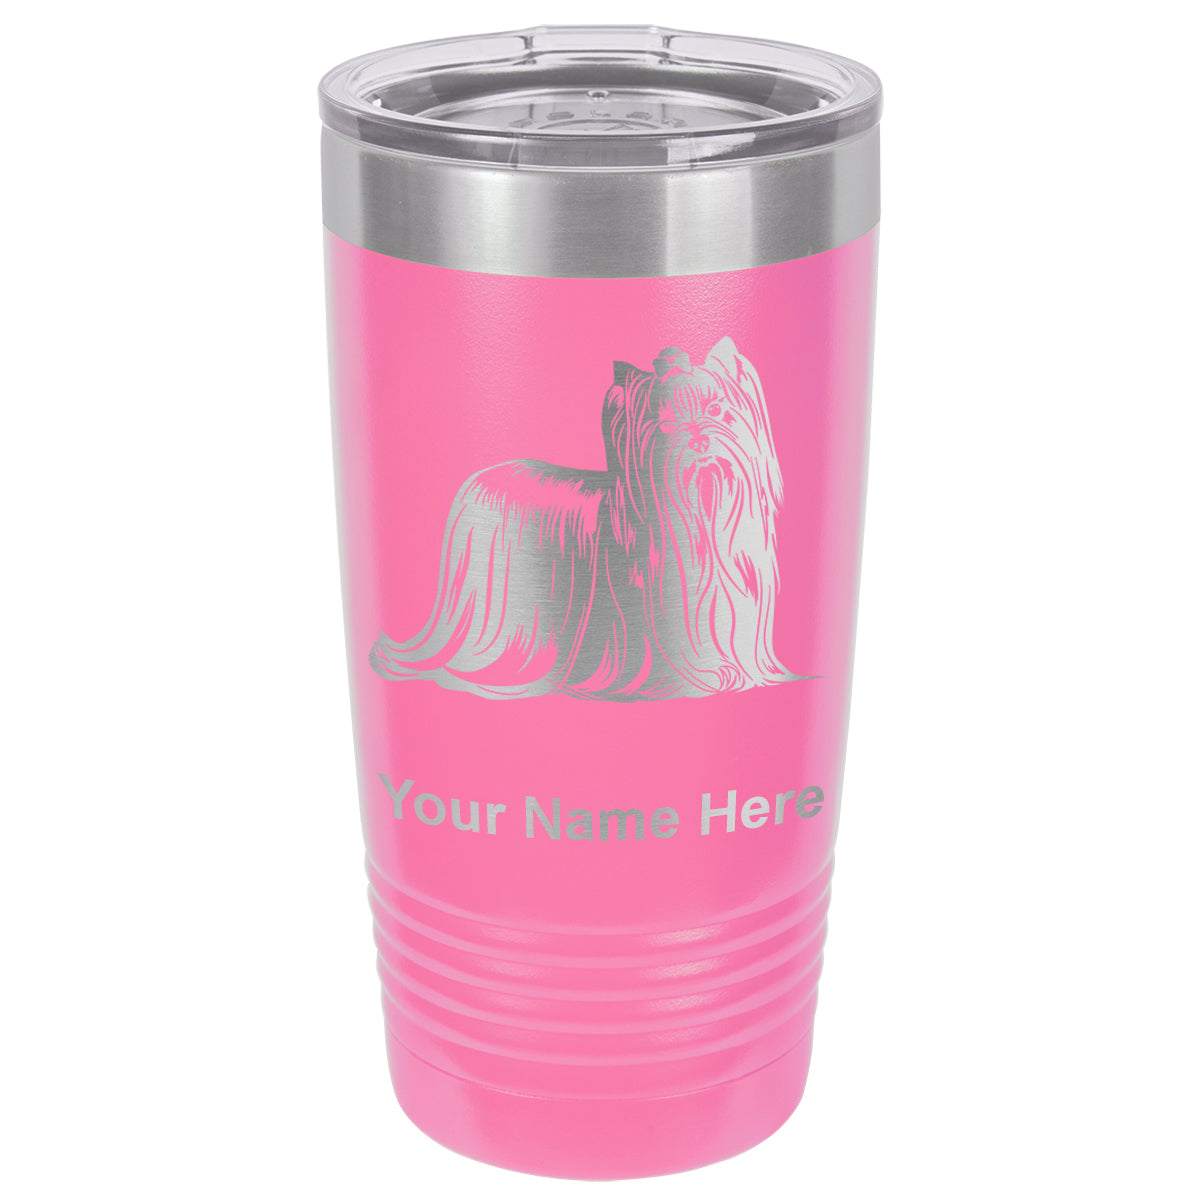 20oz Vacuum Insulated Tumbler Mug, Yorkshire Terrier Dog, Personalized Engraving Included